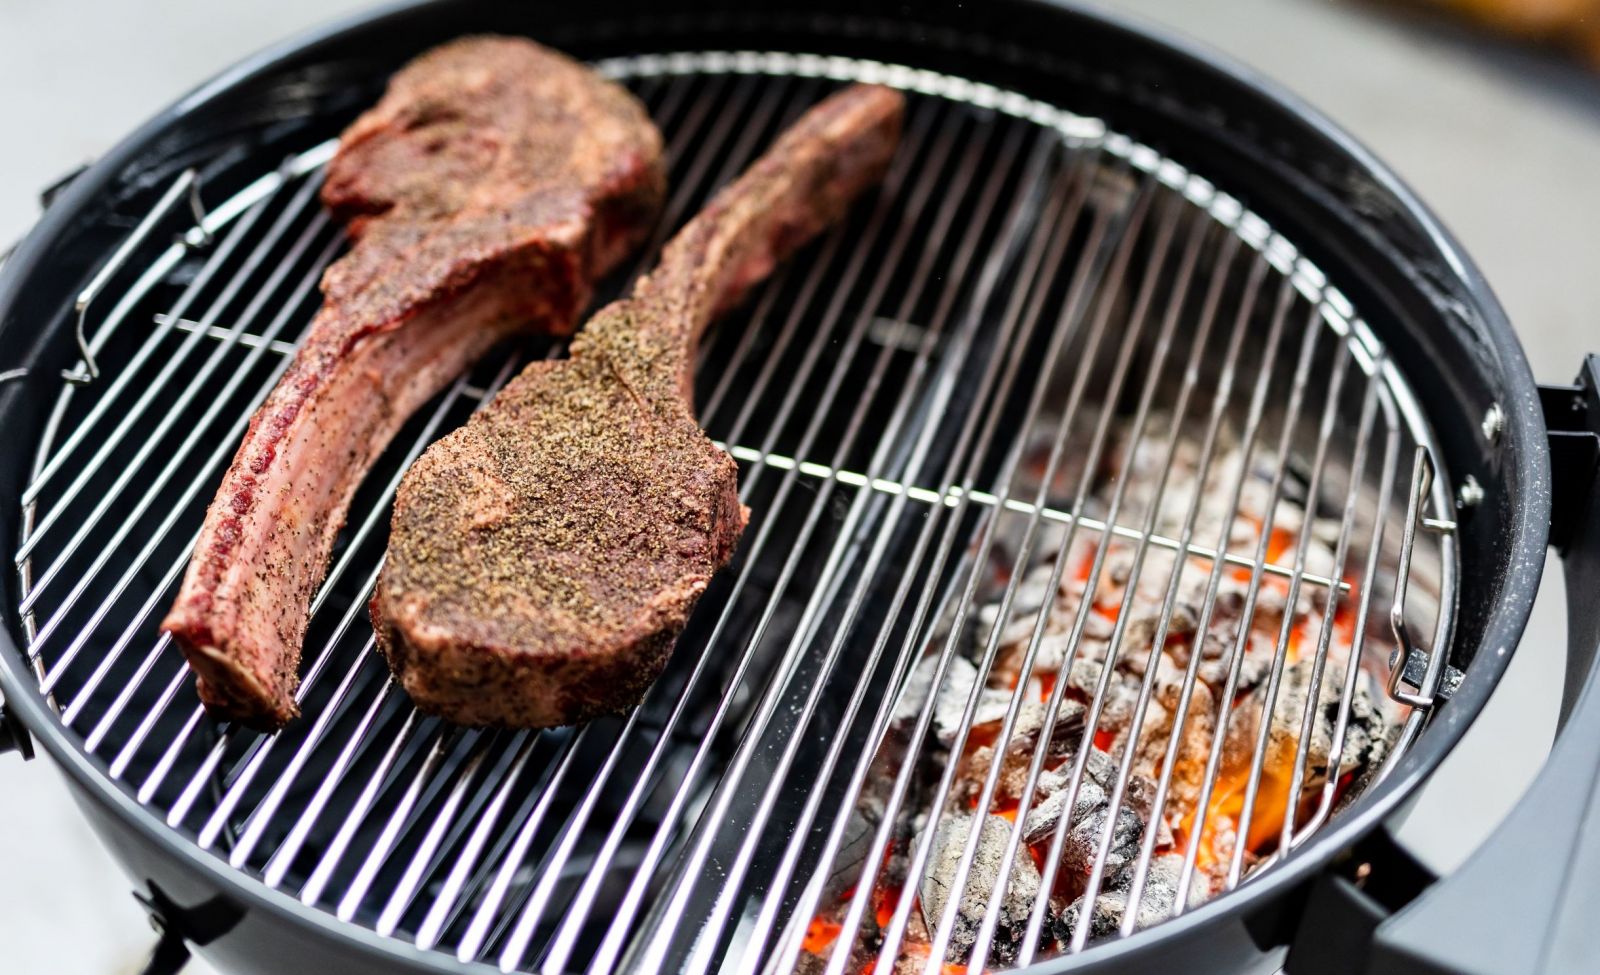 This image shows the Slow n Sear Kettle BBQ reverse searing some steaks with the use of the SnS charcoal holder